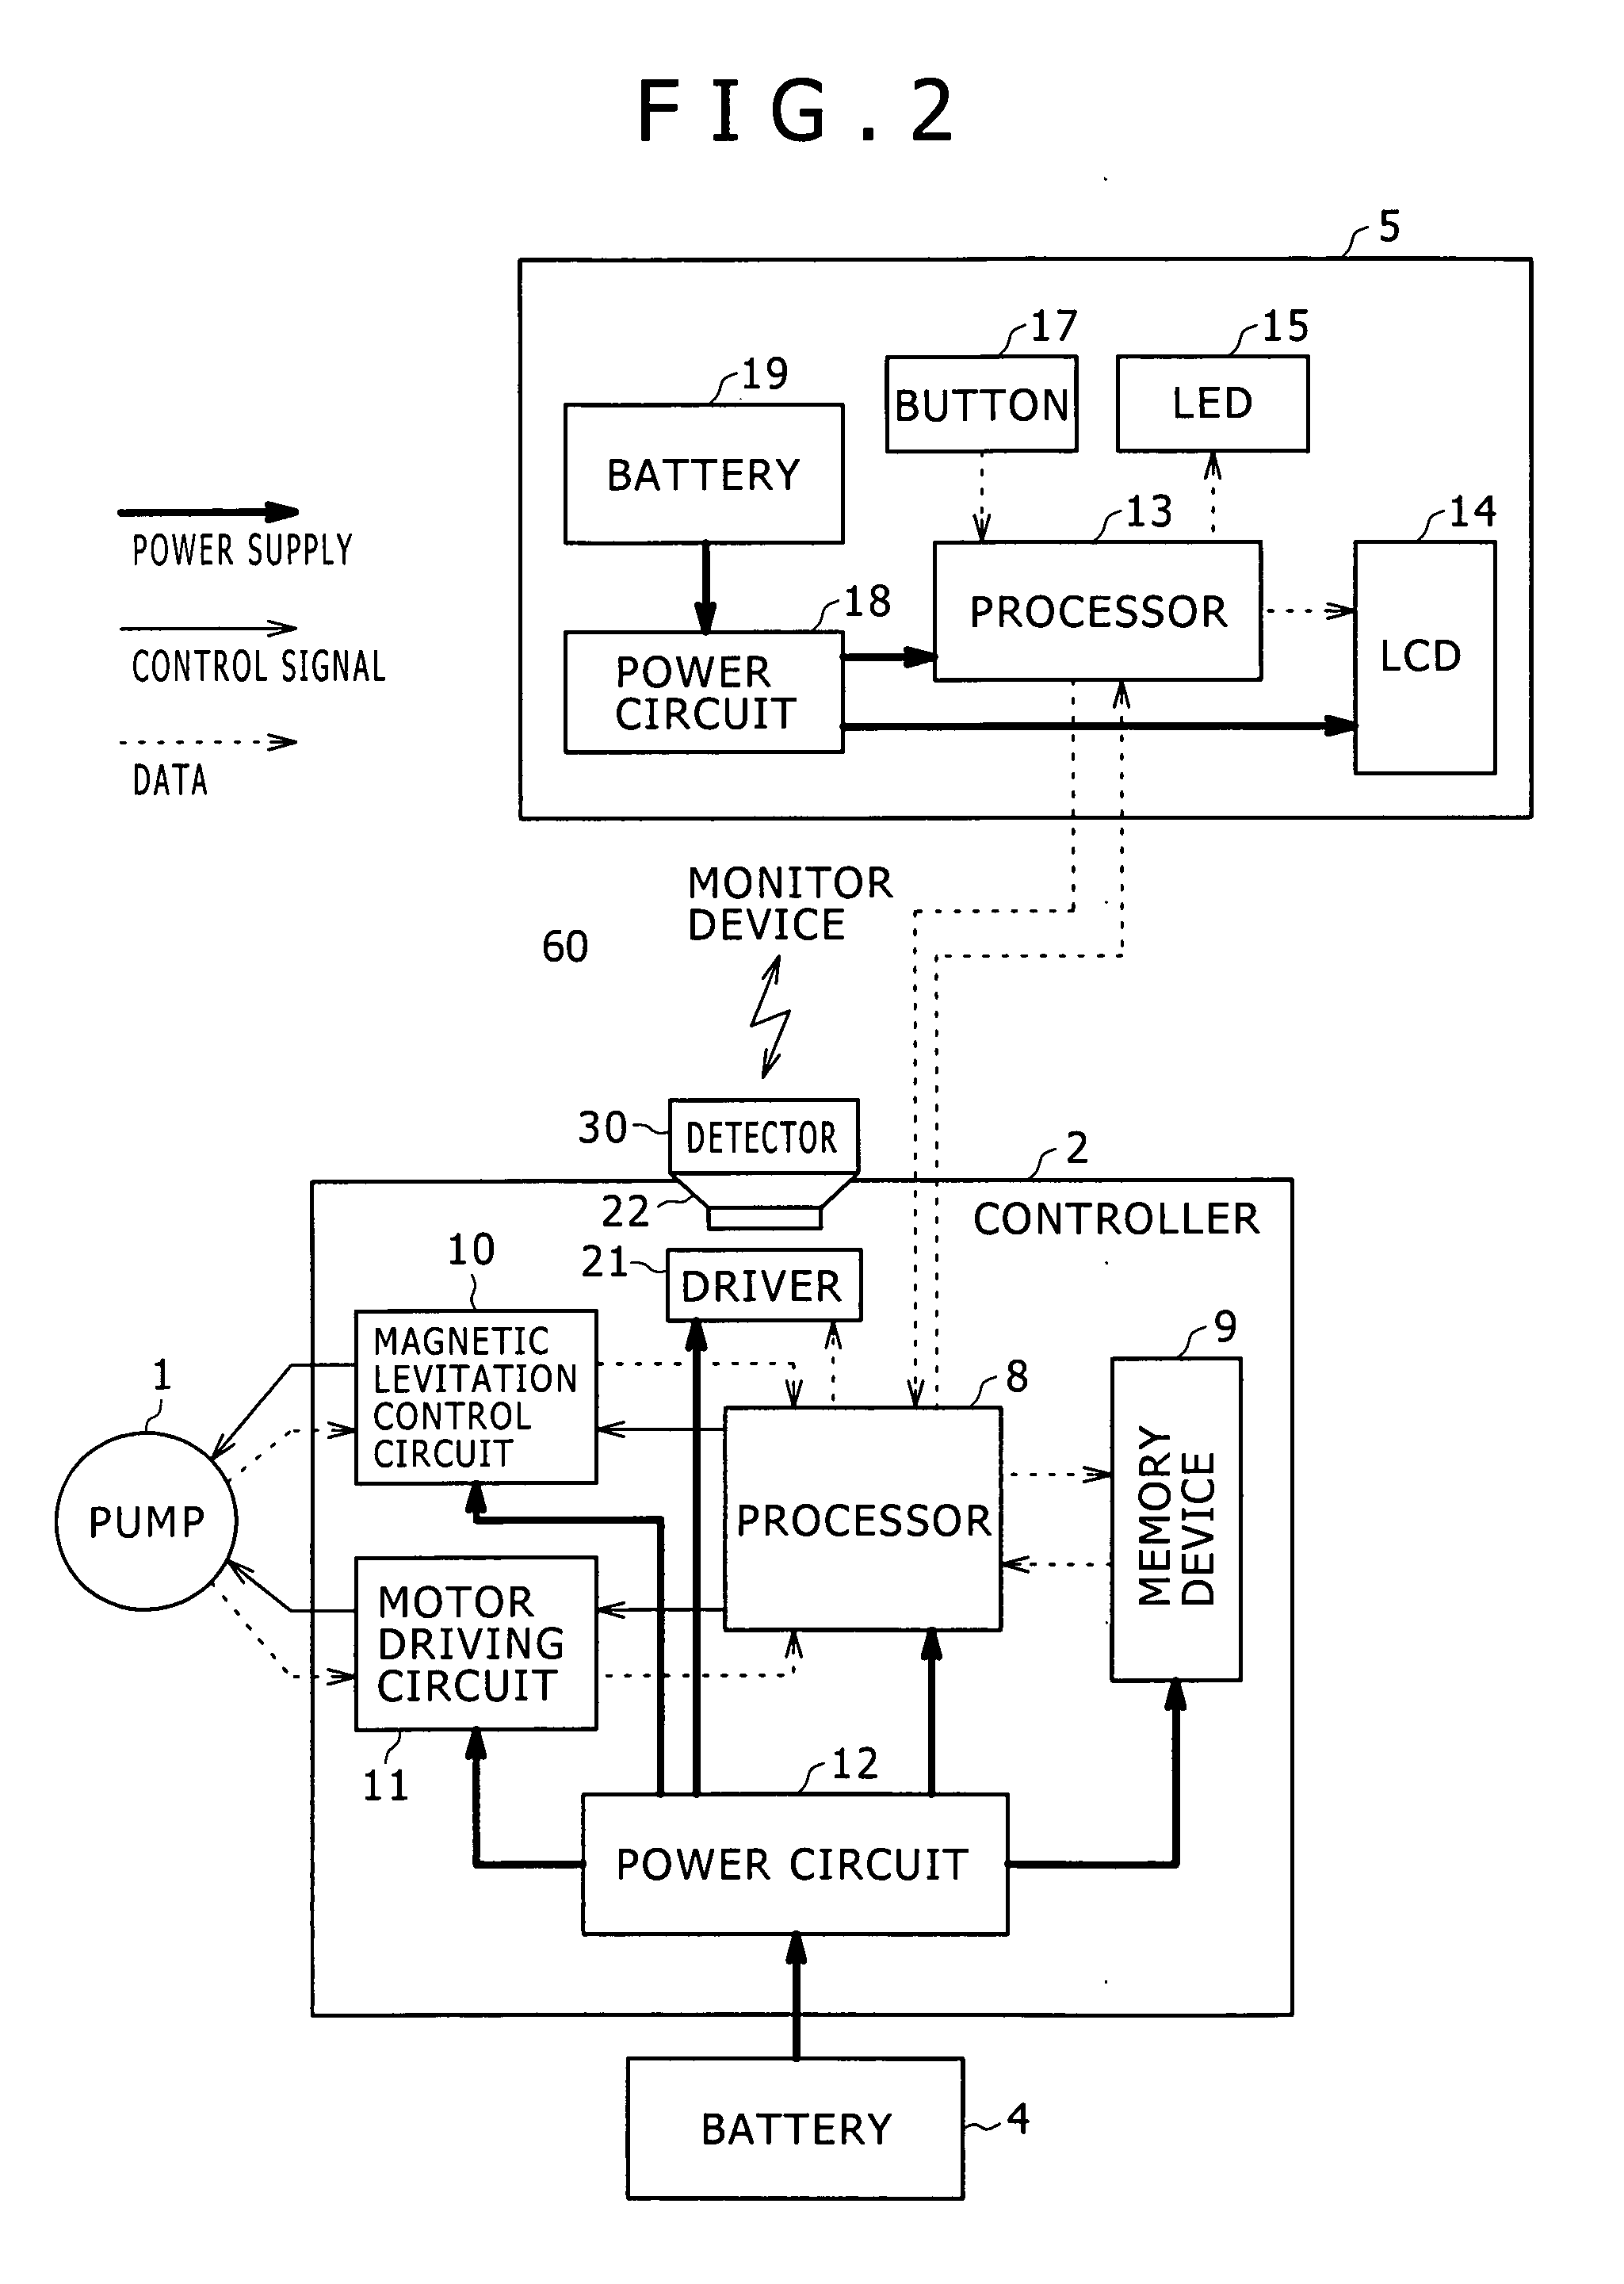 Blood pump system for artificial heart and apparatus supervisory system